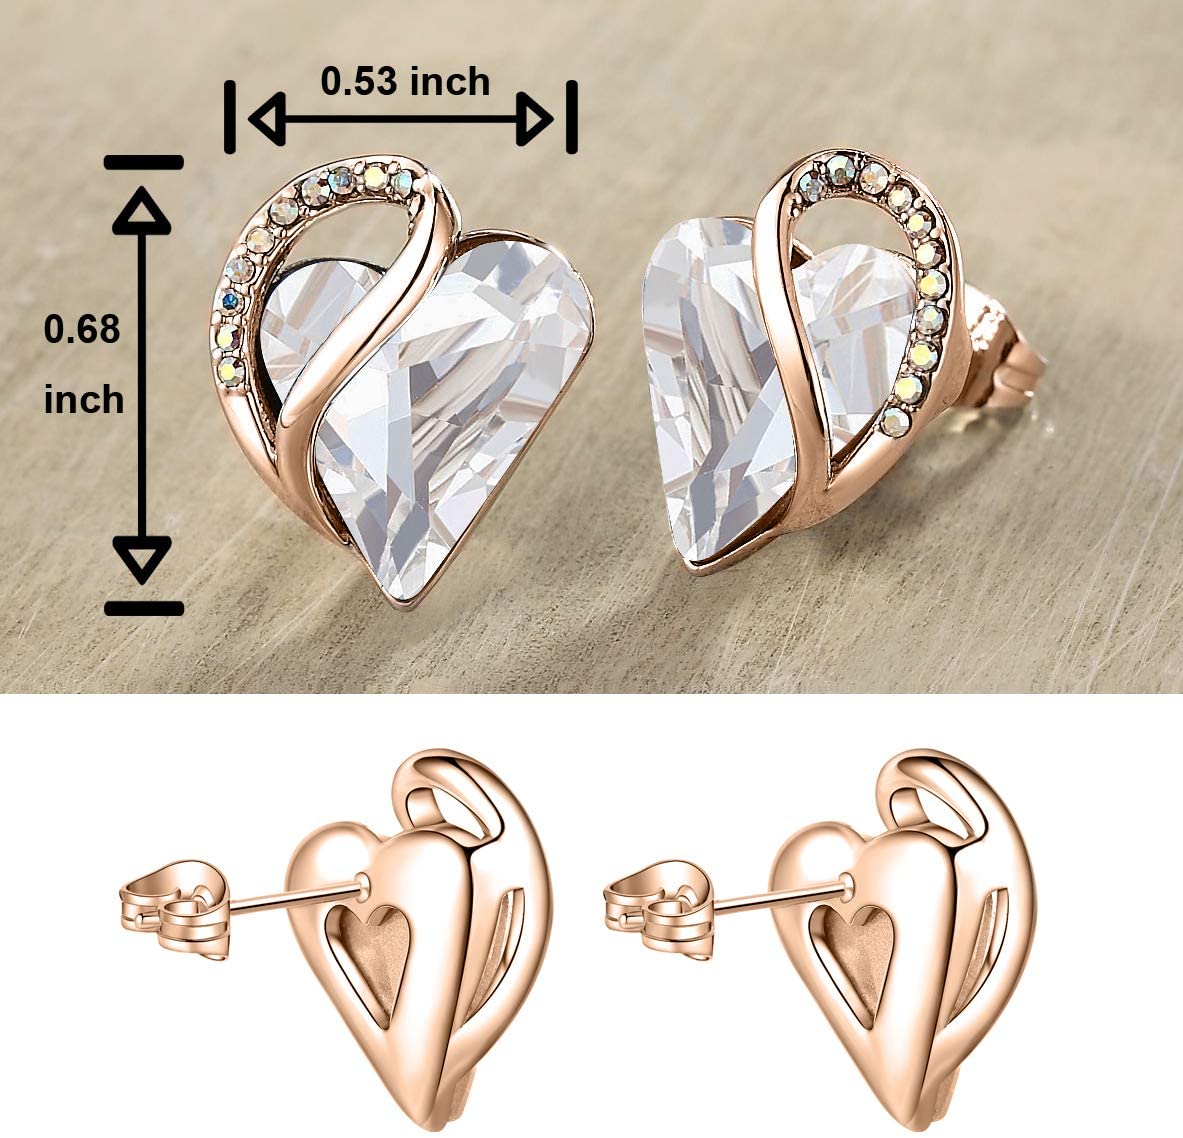 Leafael 18K Rose Gold Plated Love Heart Stud Earrings with Healing Stone Crystal Jewelry Gifts for Women